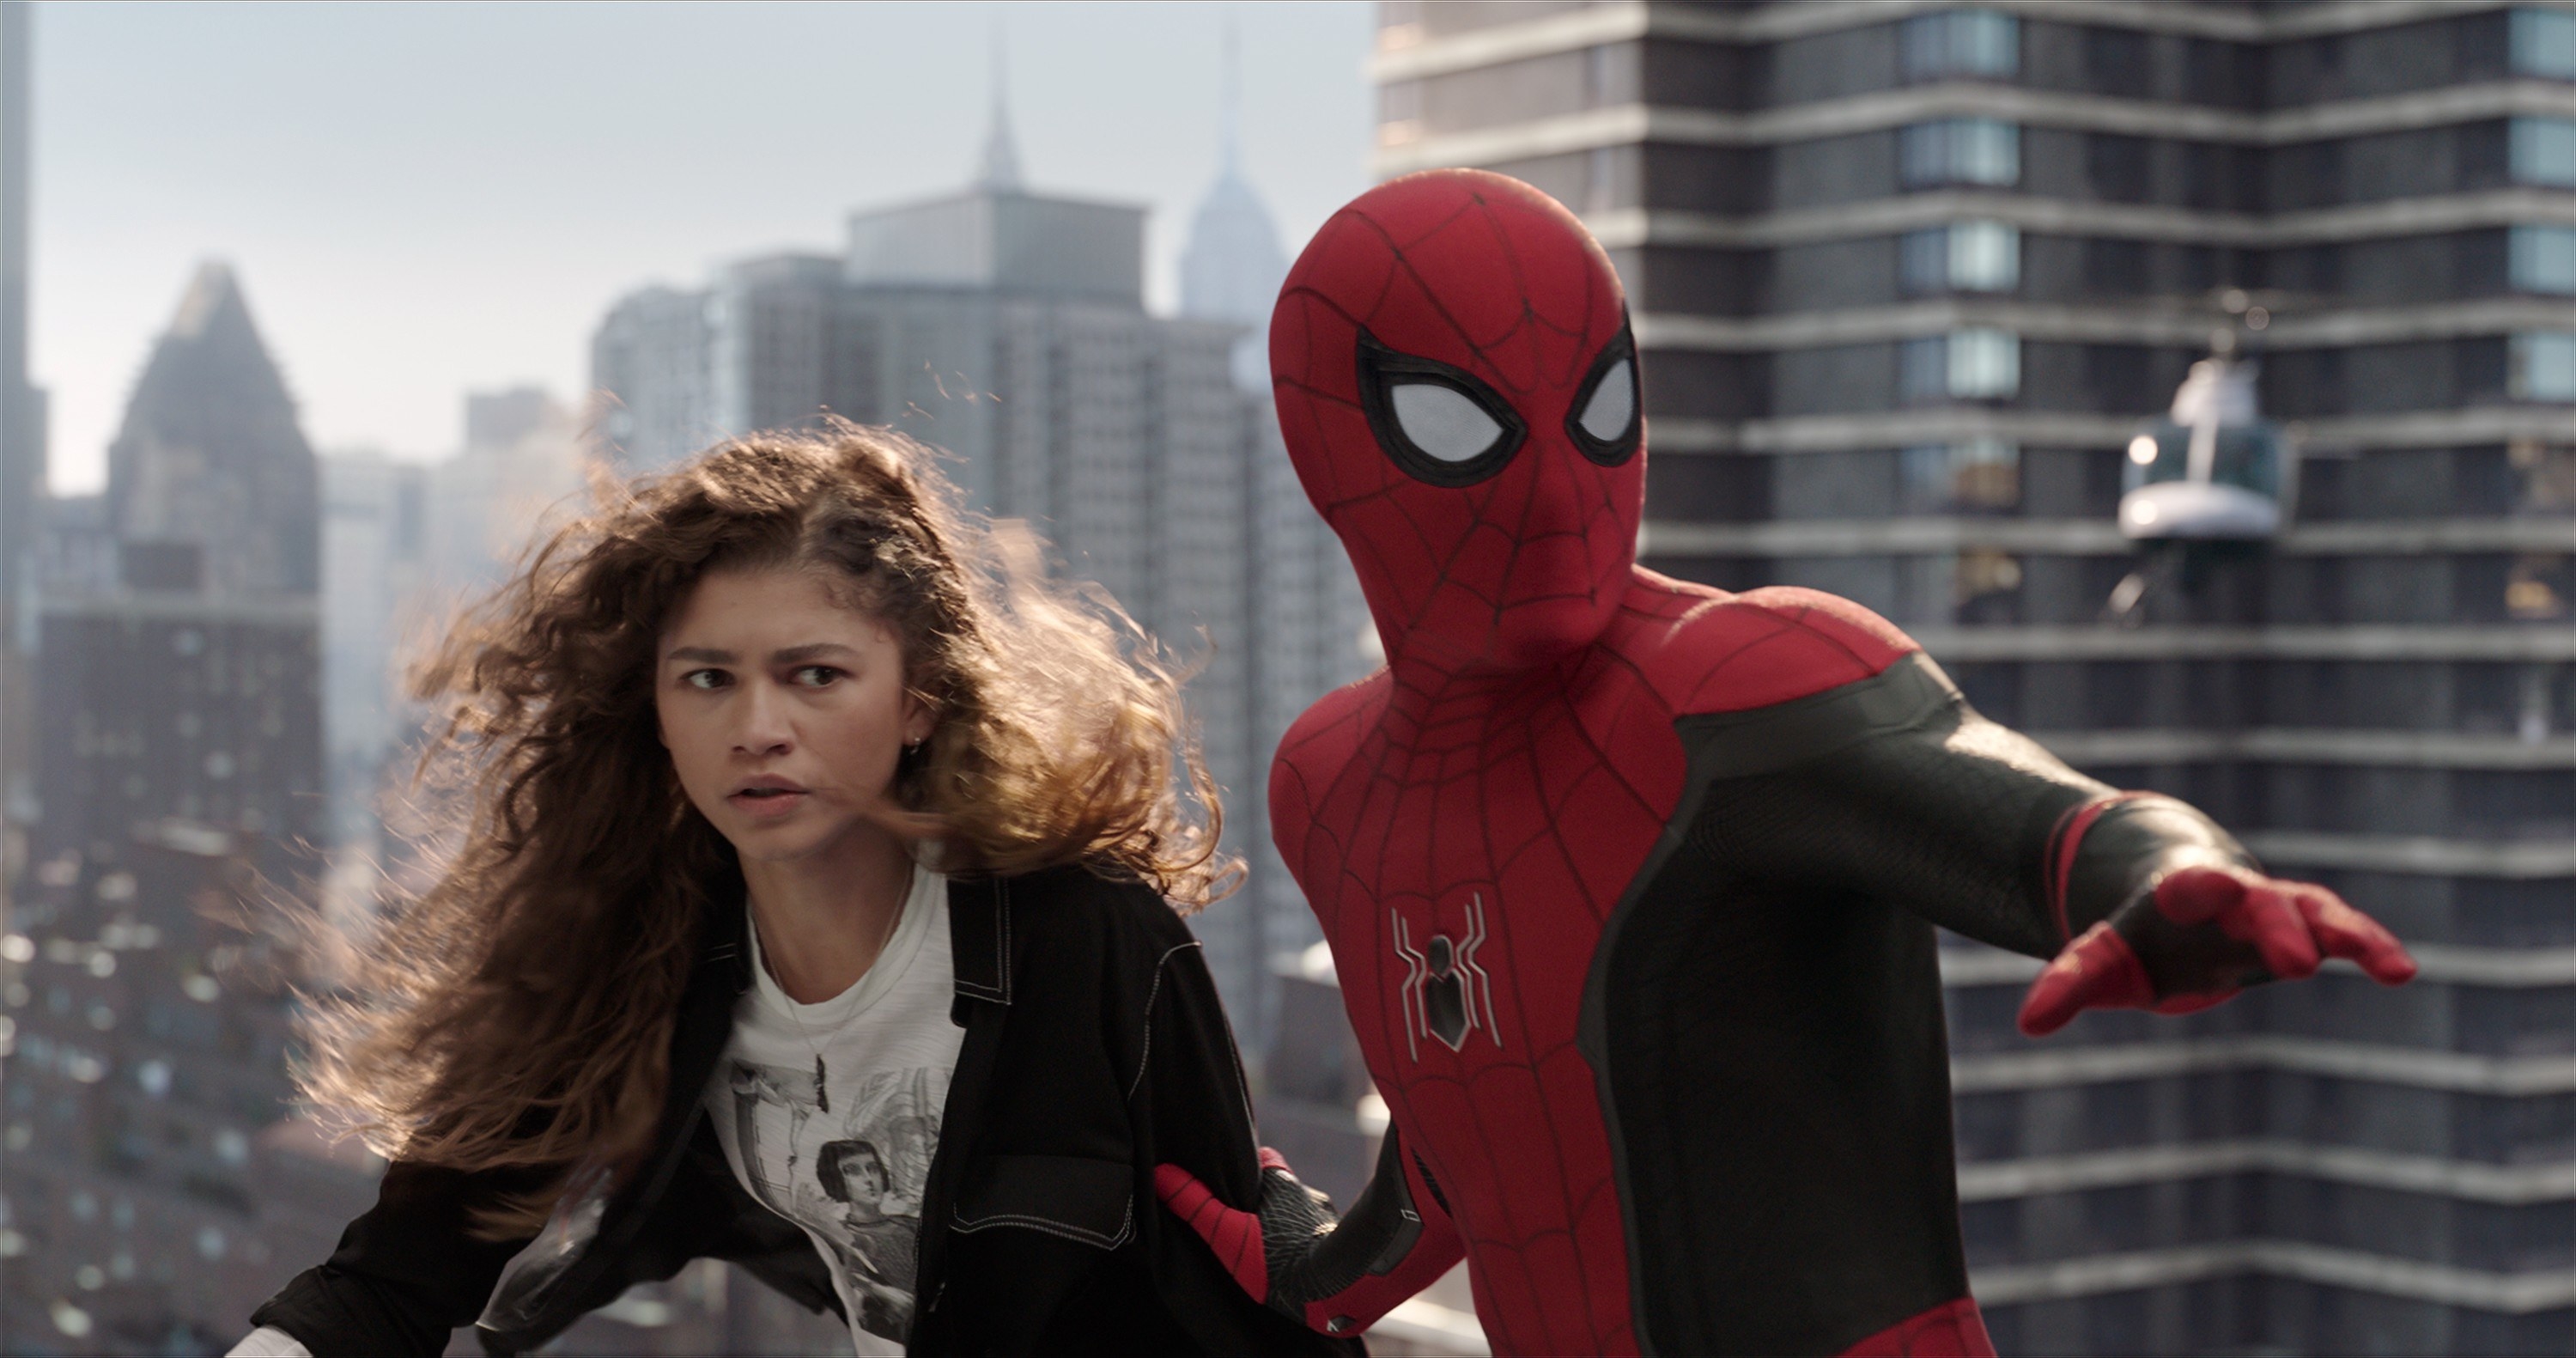 balancing on a rooftop, Peter holds onto MJ&#x27;s arm so she doesn&#x27;t